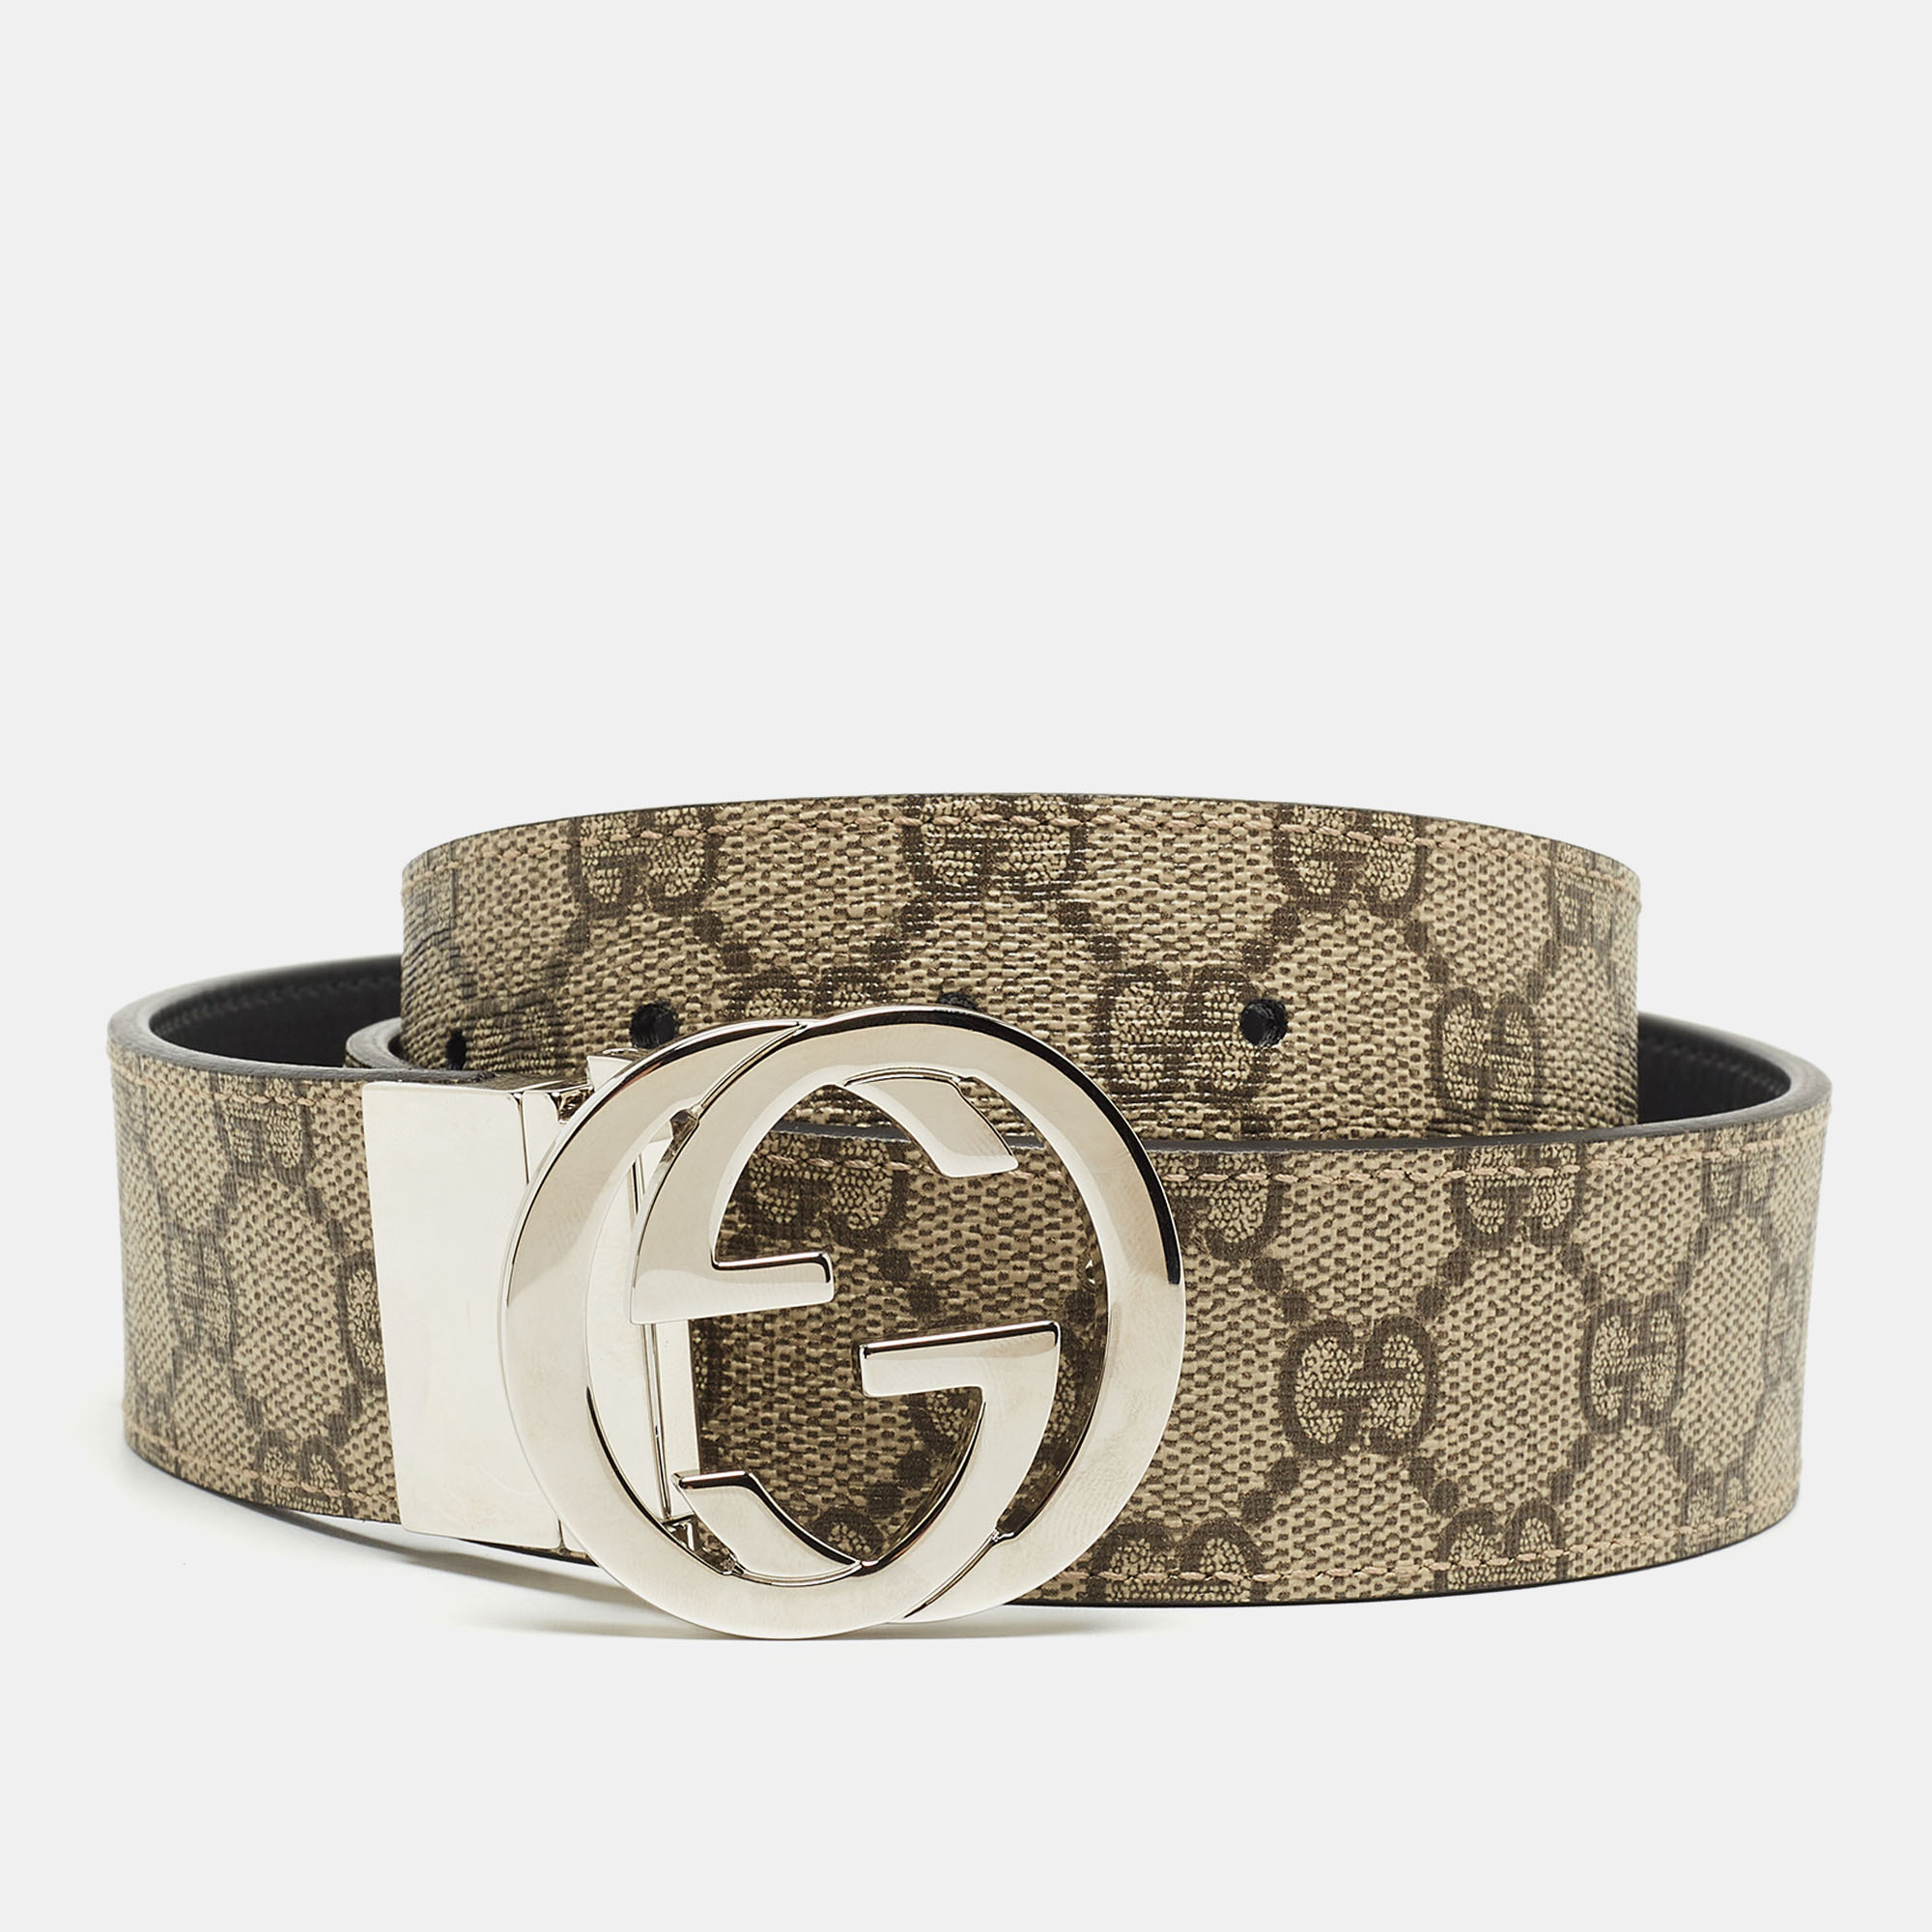 Gucci, Accessories, Gucci Belt Brown Leather Silver Buckle